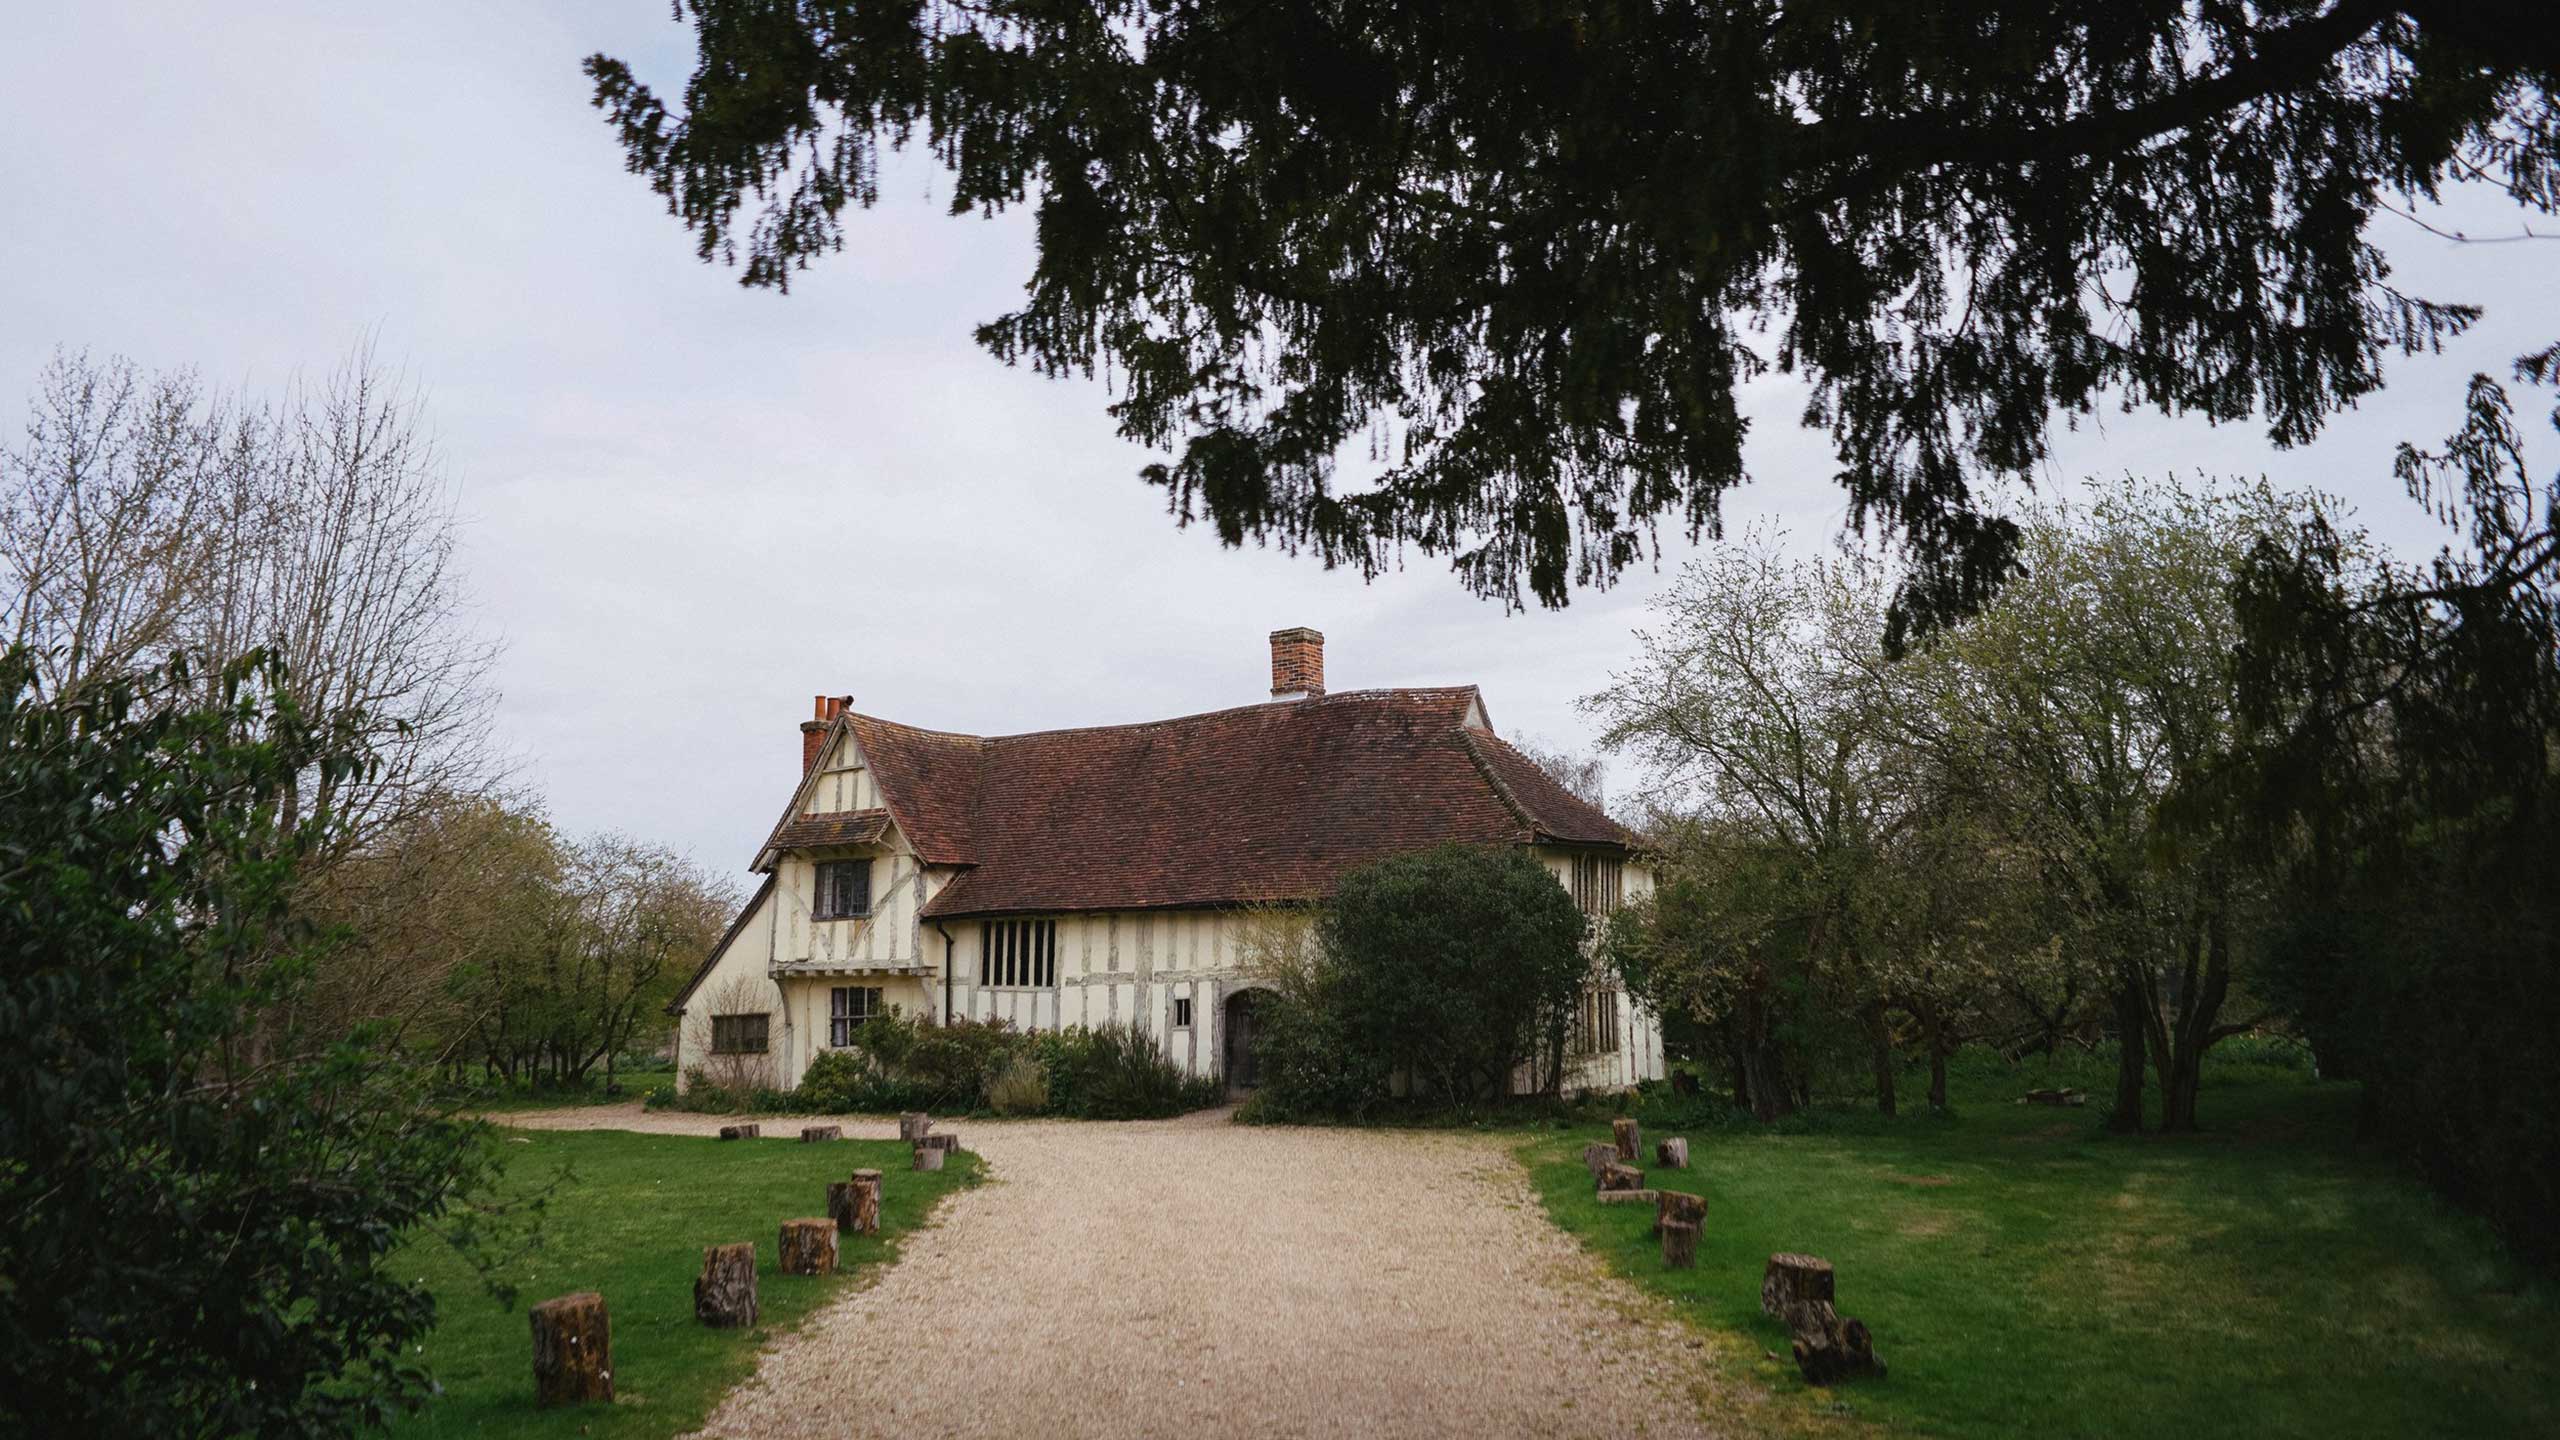 Listed Buildings: What The Different Grades Mean